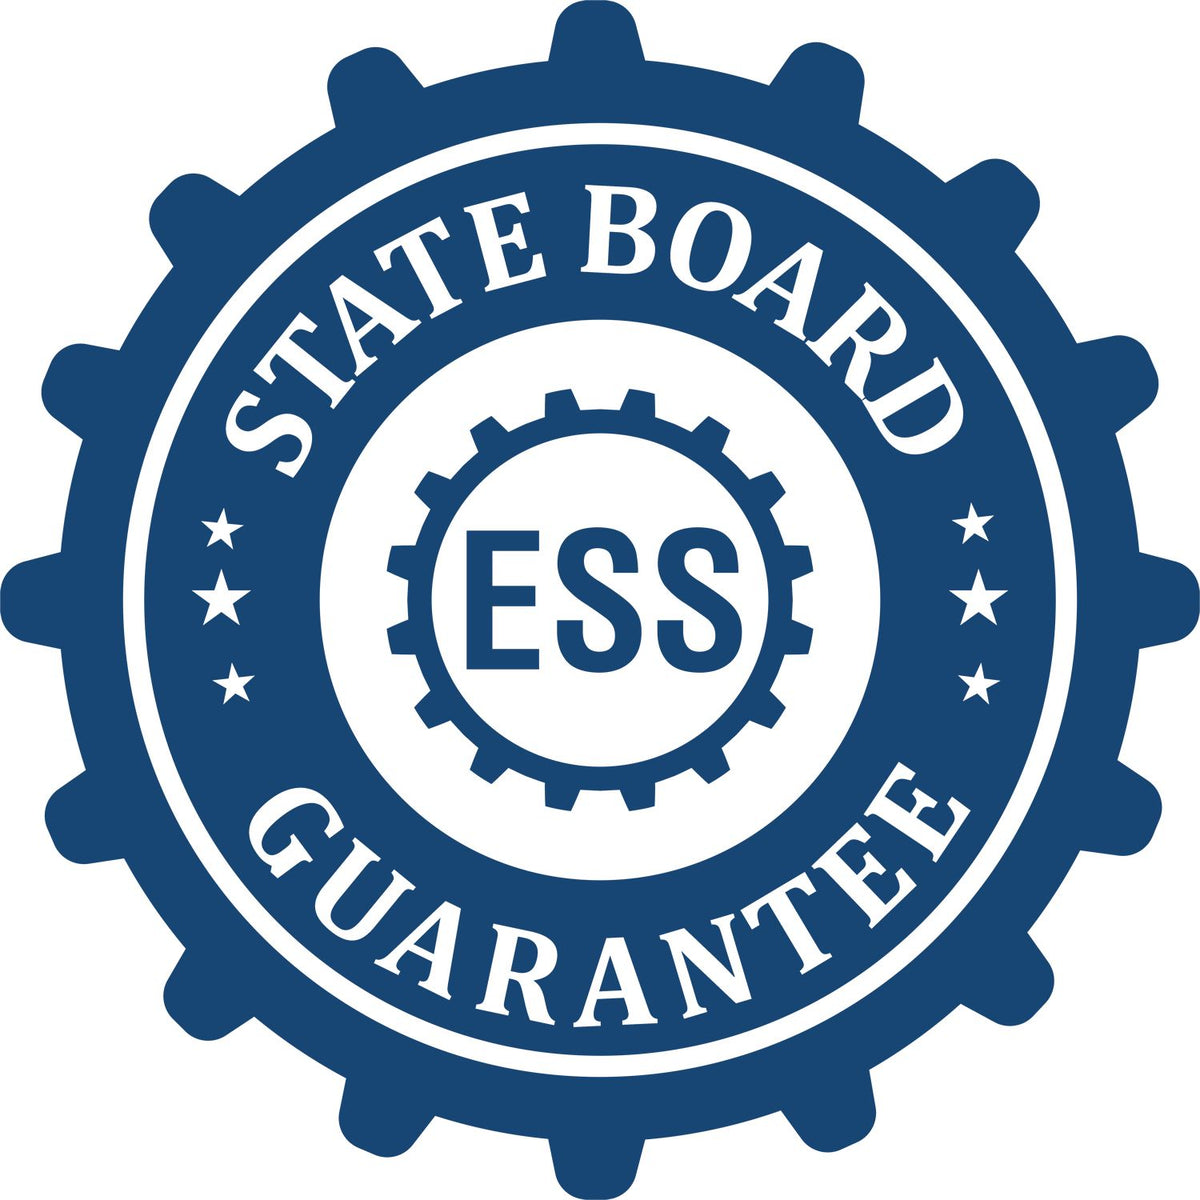 An emblem in a gear shape illustrating a state board guarantee for the Tennessee Landscape Architectural Seal Stamp product.